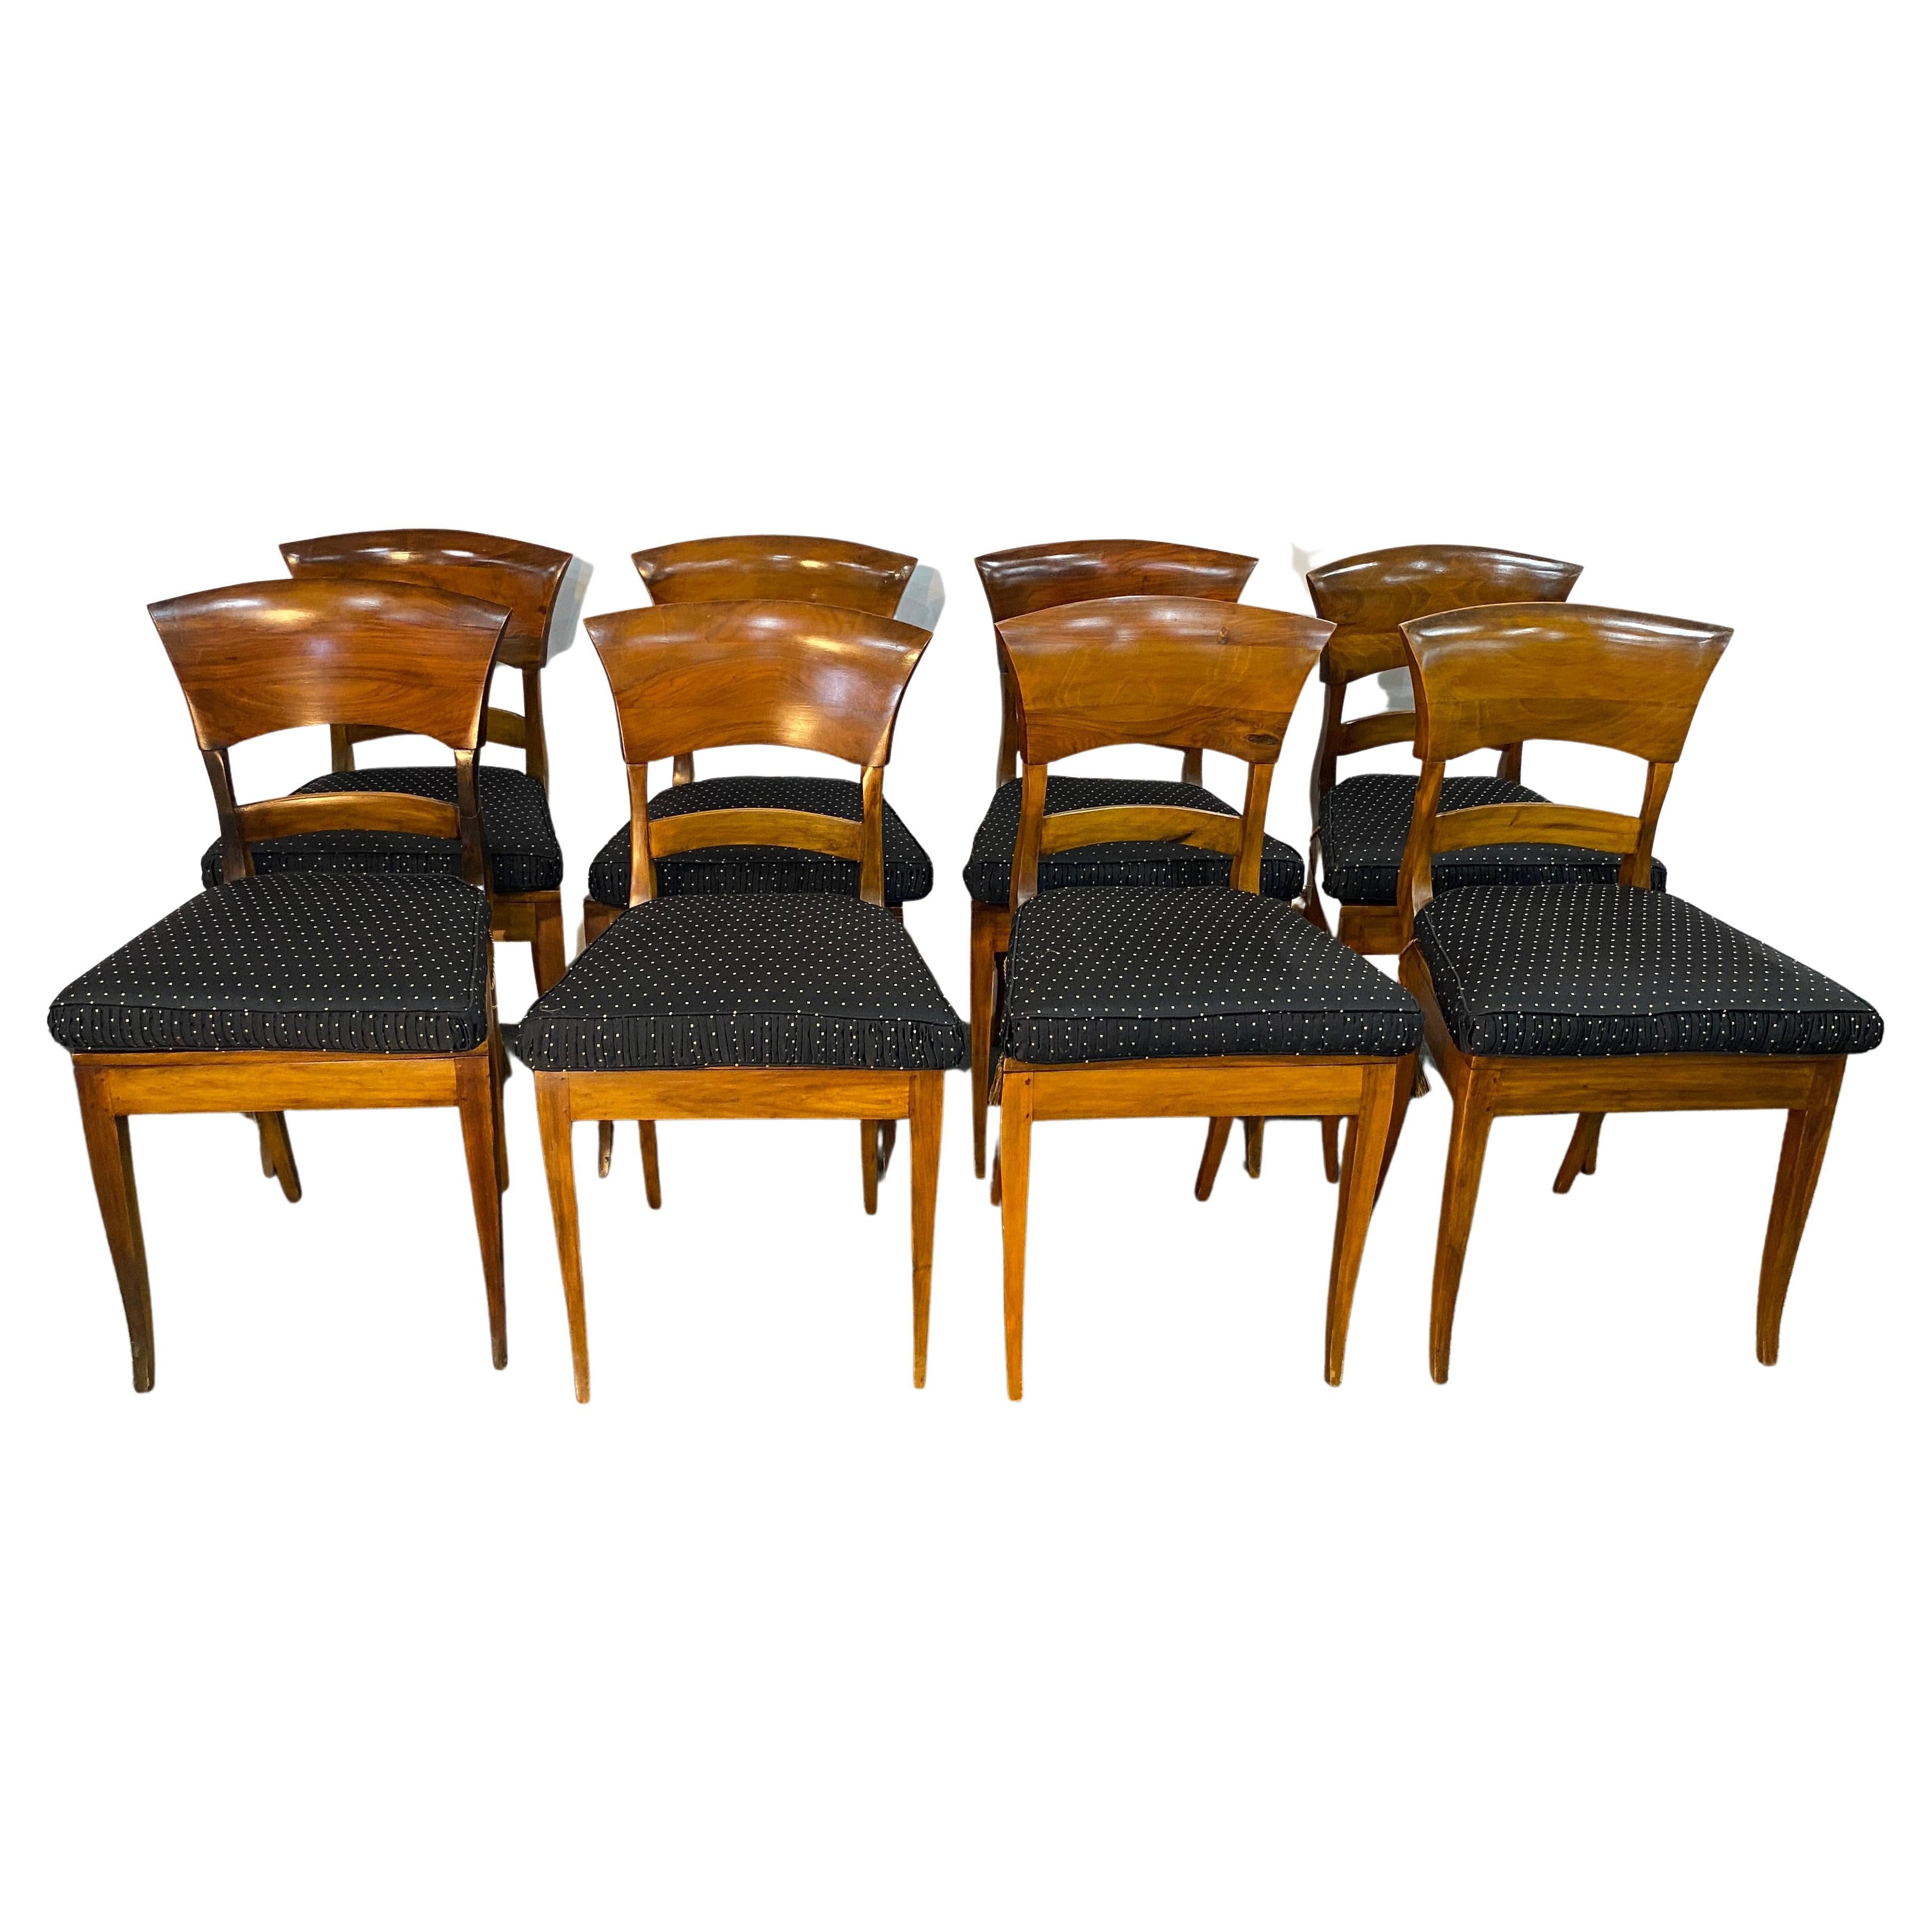 8 Italian Biedermeier Style Dining Chairs with Cane Seats